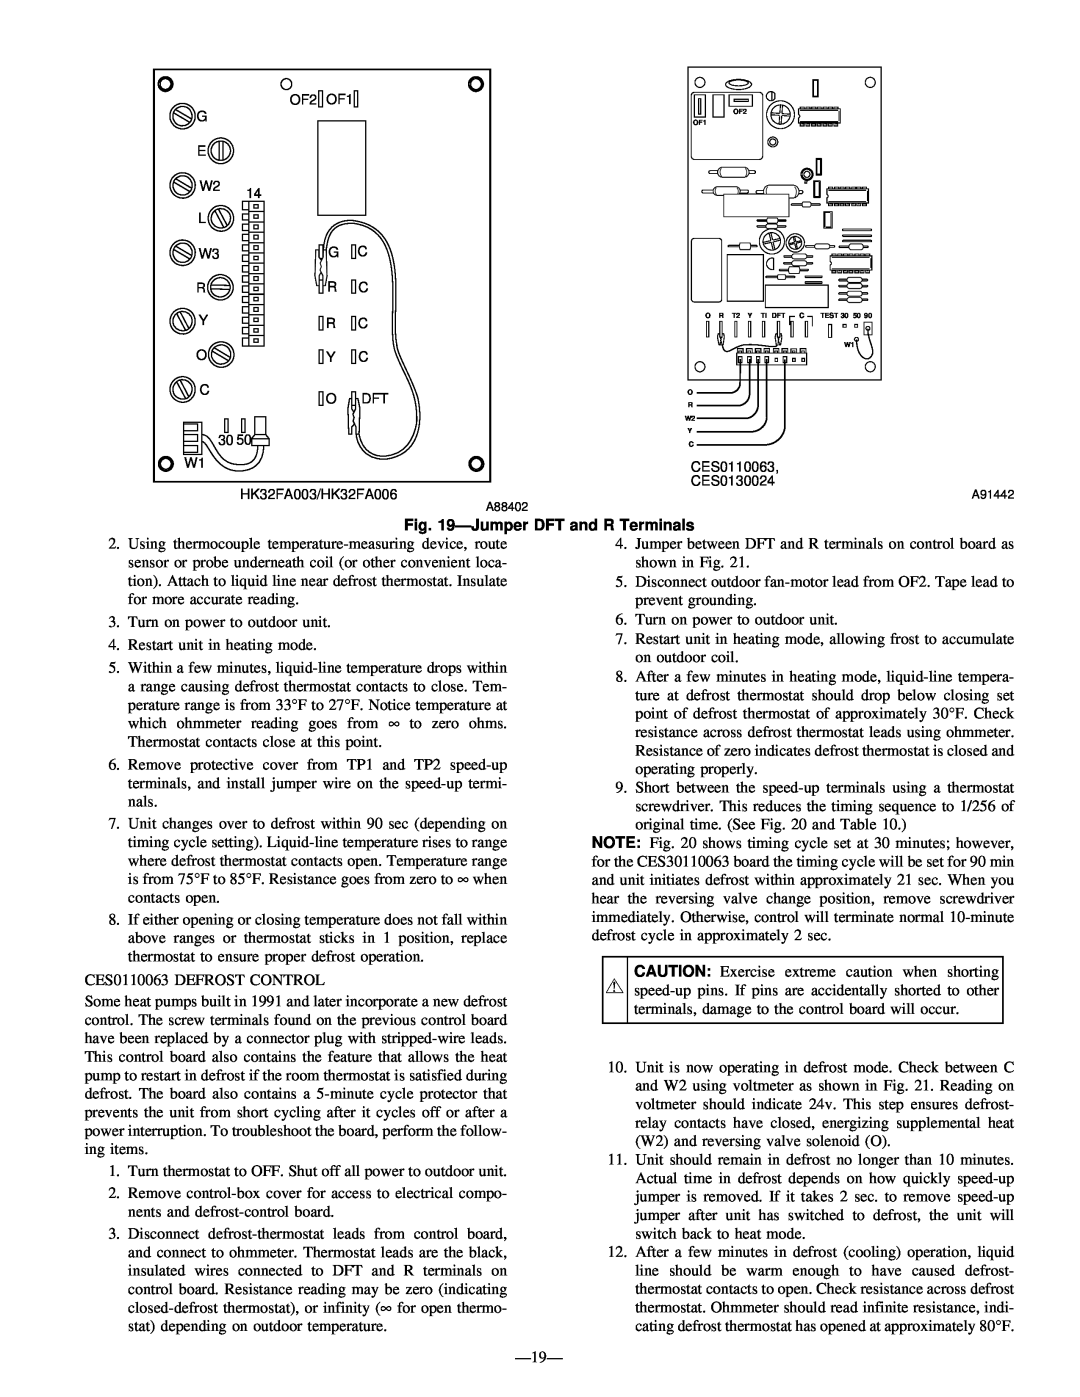 Bryant R-22 service manual JumperDFT and R Terminals 